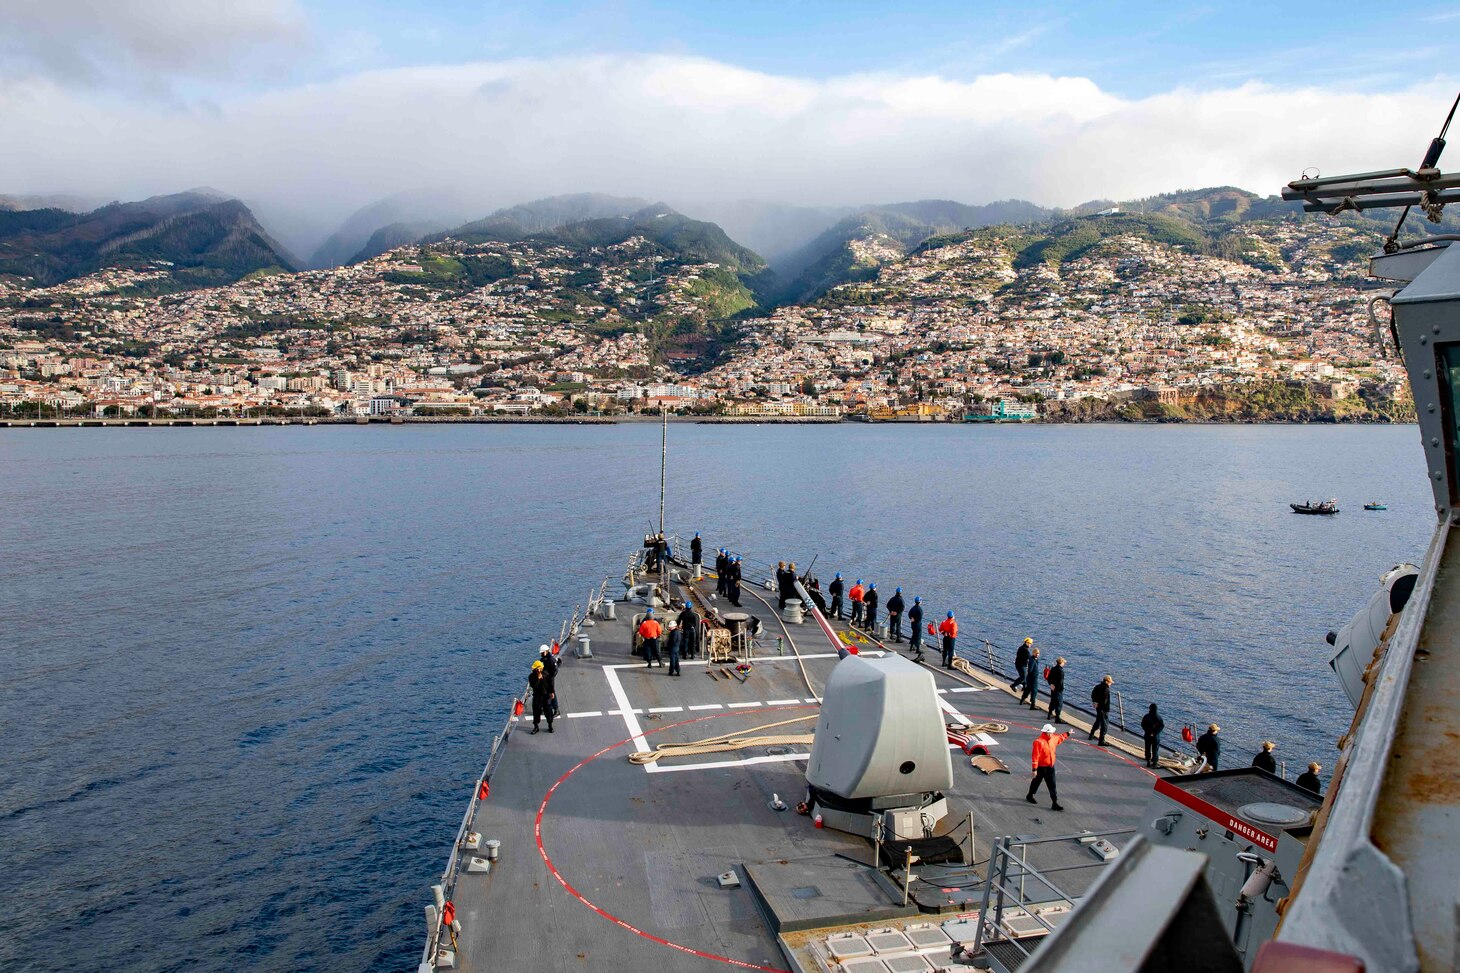 FUNCHAL, Portugal (Feb 23, 2023) The Arleigh Burke-class guided-missile destroyer USS Porter (DDG 78) arrives in Funchal, Feb. 23, 2023. Porter is on a scheduled deployment in the U.S. Naval Forces Europe area of operations, employed by the U.S. Sixth Fleet to defend U.S., allied and partner interests. (U.S. Navy photo by Mass Communication Specialist 2nd Class Sawyer Connally)